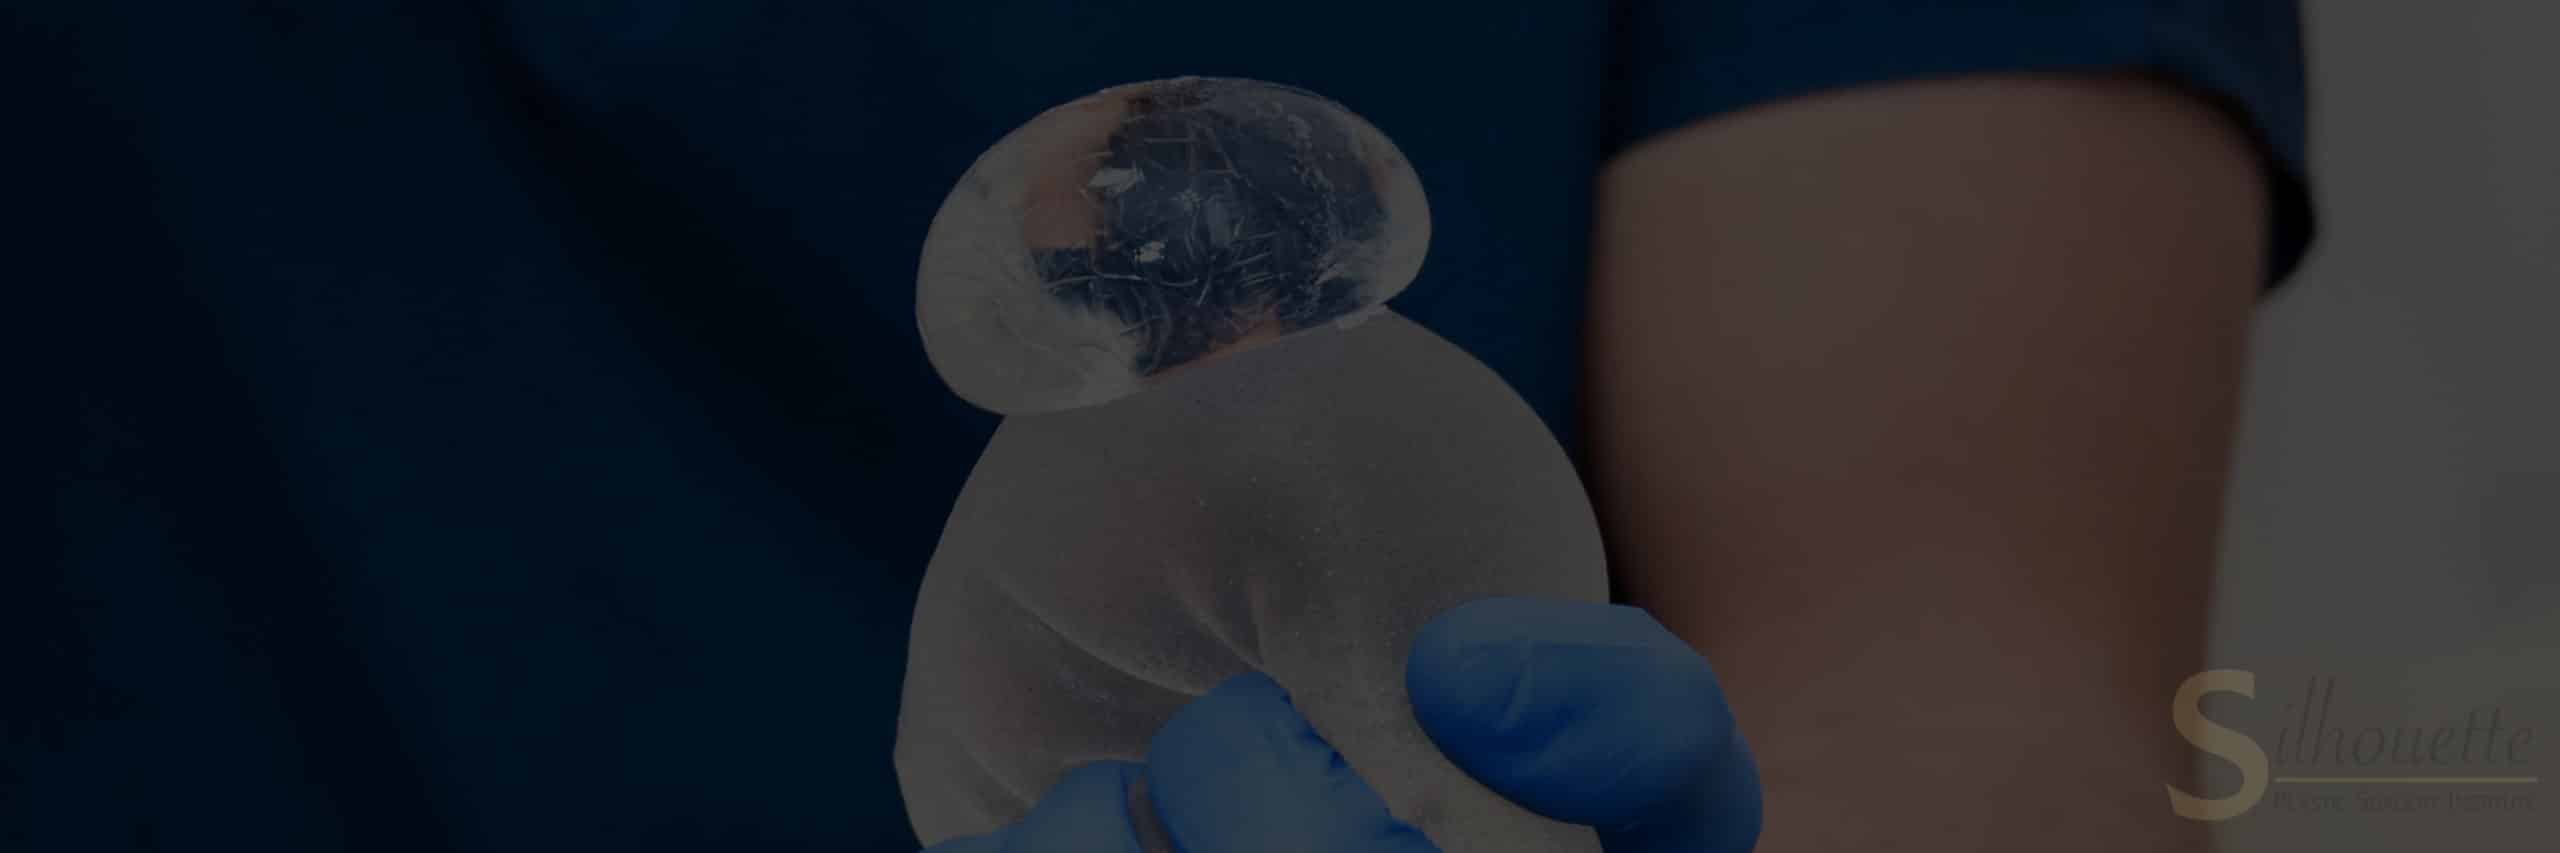 breast implant removal surgery